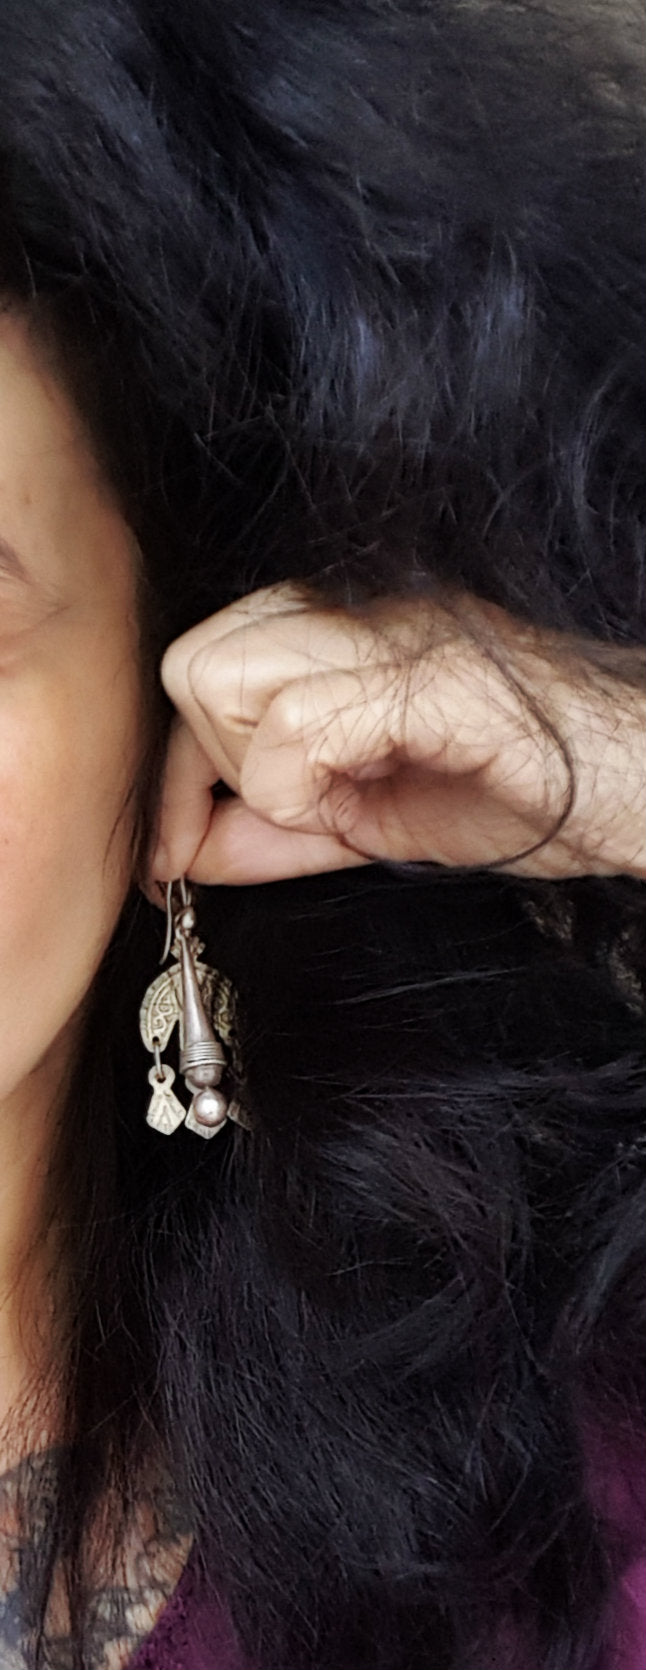 Cone Dangle Earrings from India